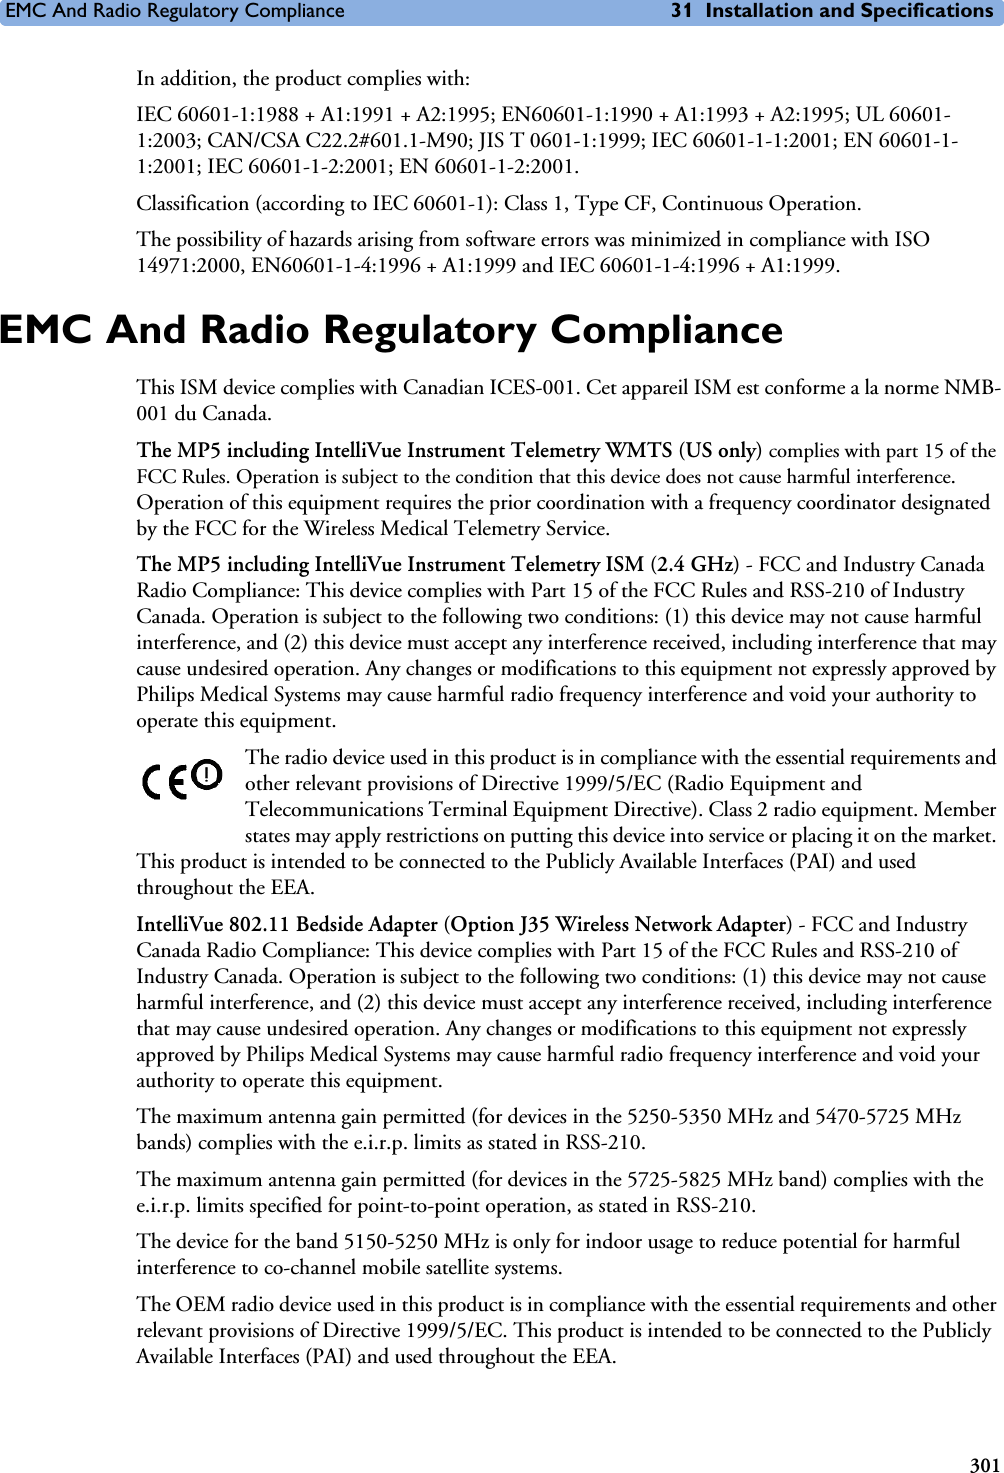 EMC And Radio Regulatory Compliance 31 Installation and Specifications301In addition, the product complies with:IEC 60601-1:1988 + A1:1991 + A2:1995; EN60601-1:1990 + A1:1993 + A2:1995; UL 60601-1:2003; CAN/CSA C22.2#601.1-M90; JIS T 0601-1:1999; IEC 60601-1-1:2001; EN 60601-1-1:2001; IEC 60601-1-2:2001; EN 60601-1-2:2001.Classification (according to IEC 60601-1): Class 1, Type CF, Continuous Operation. The possibility of hazards arising from software errors was minimized in compliance with ISO 14971:2000, EN60601-1-4:1996 + A1:1999 and IEC 60601-1-4:1996 + A1:1999.EMC And Radio Regulatory ComplianceThis ISM device complies with Canadian ICES-001. Cet appareil ISM est conforme a la norme NMB-001 du Canada.The MP5 including IntelliVue Instrument Telemetry WMTS (US only) complies with part 15 of the FCC Rules. Operation is subject to the condition that this device does not cause harmful interference. Operation of this equipment requires the prior coordination with a frequency coordinator designated by the FCC for the Wireless Medical Telemetry Service.The MP5 including IntelliVue Instrument Telemetry ISM (2.4 GHz) - FCC and Industry Canada Radio Compliance: This device complies with Part 15 of the FCC Rules and RSS-210 of Industry Canada. Operation is subject to the following two conditions: (1) this device may not cause harmful interference, and (2) this device must accept any interference received, including interference that may cause undesired operation. Any changes or modifications to this equipment not expressly approved by Philips Medical Systems may cause harmful radio frequency interference and void your authority to operate this equipment.The radio device used in this product is in compliance with the essential requirements and other relevant provisions of Directive 1999/5/EC (Radio Equipment and Telecommunications Terminal Equipment Directive). Class 2 radio equipment. Member states may apply restrictions on putting this device into service or placing it on the market. This product is intended to be connected to the Publicly Available Interfaces (PAI) and used throughout the EEA.IntelliVue 802.11 Bedside Adapter (Option J35 Wireless Network Adapter) - FCC and Industry Canada Radio Compliance: This device complies with Part 15 of the FCC Rules and RSS-210 of Industry Canada. Operation is subject to the following two conditions: (1) this device may not cause harmful interference, and (2) this device must accept any interference received, including interference that may cause undesired operation. Any changes or modifications to this equipment not expressly approved by Philips Medical Systems may cause harmful radio frequency interference and void your authority to operate this equipment.The maximum antenna gain permitted (for devices in the 5250-5350 MHz and 5470-5725 MHz bands) complies with the e.i.r.p. limits as stated in RSS-210.The maximum antenna gain permitted (for devices in the 5725-5825 MHz band) complies with the e.i.r.p. limits specified for point-to-point operation, as stated in RSS-210.The device for the band 5150-5250 MHz is only for indoor usage to reduce potential for harmful interference to co-channel mobile satellite systems.The OEM radio device used in this product is in compliance with the essential requirements and other relevant provisions of Directive 1999/5/EC. This product is intended to be connected to the Publicly Available Interfaces (PAI) and used throughout the EEA.